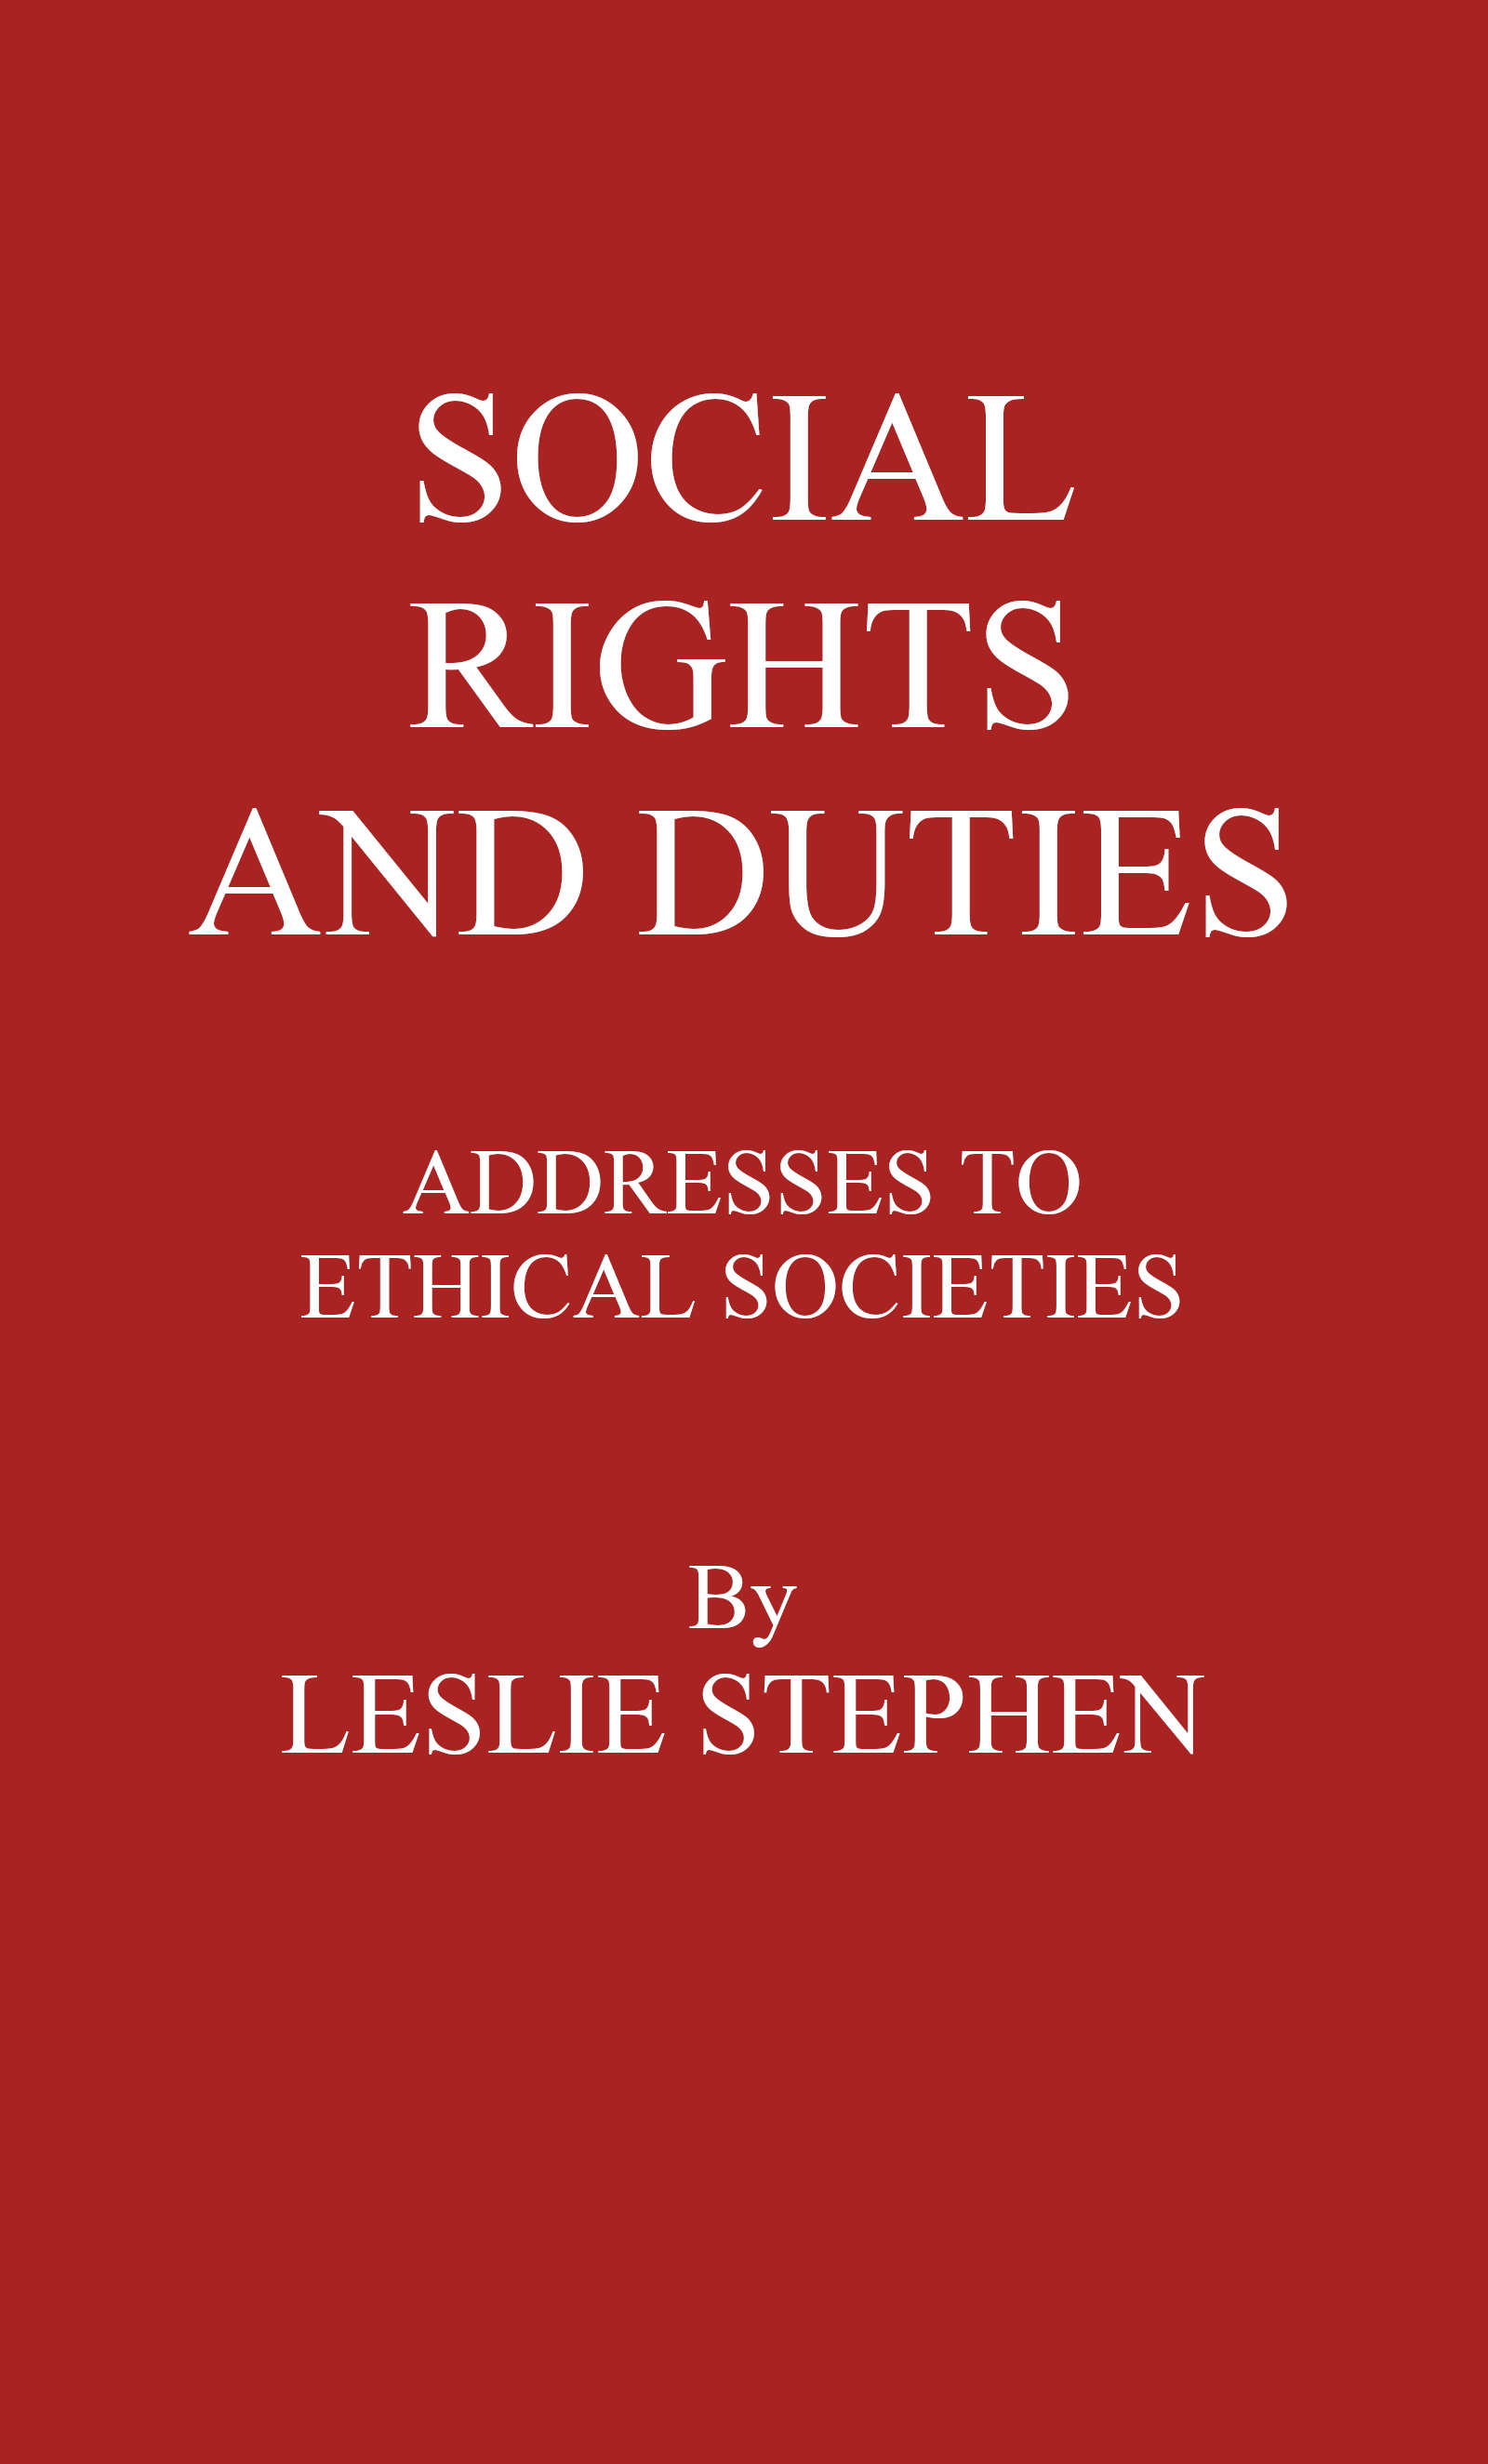 Social Rights And Duties: Addresses to Ethical Societies. Vol 1 [of 2]